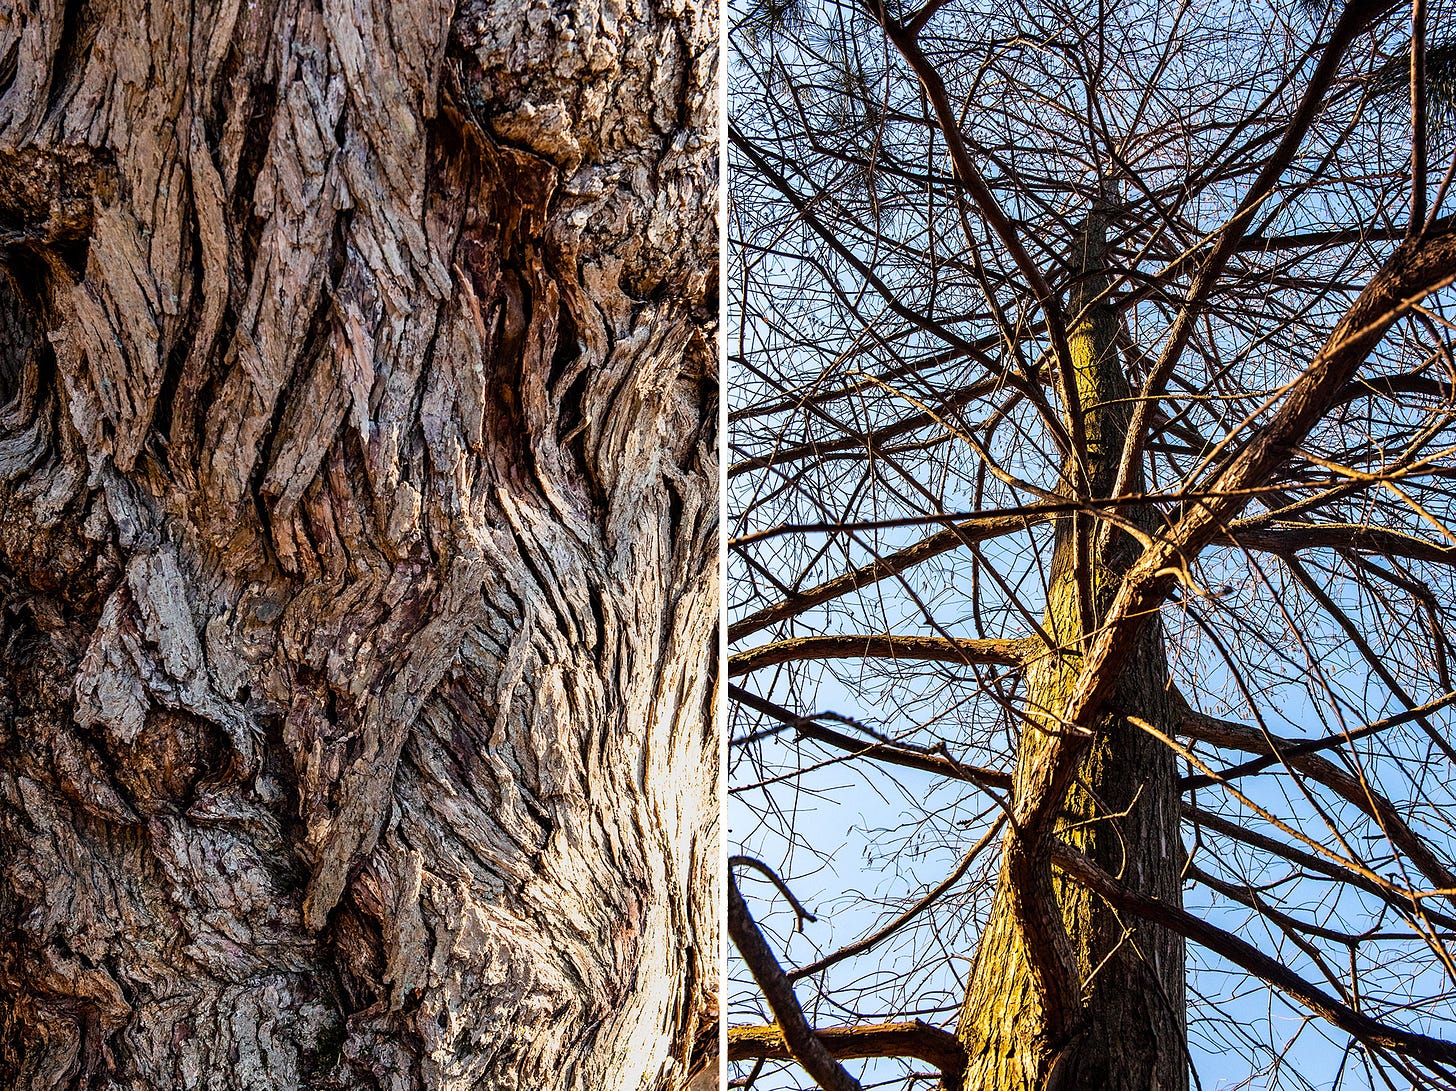 ID: Two vertical photos. On the left is deeply furrowed hickory bark, on the right is a bare redwood viewed from below.